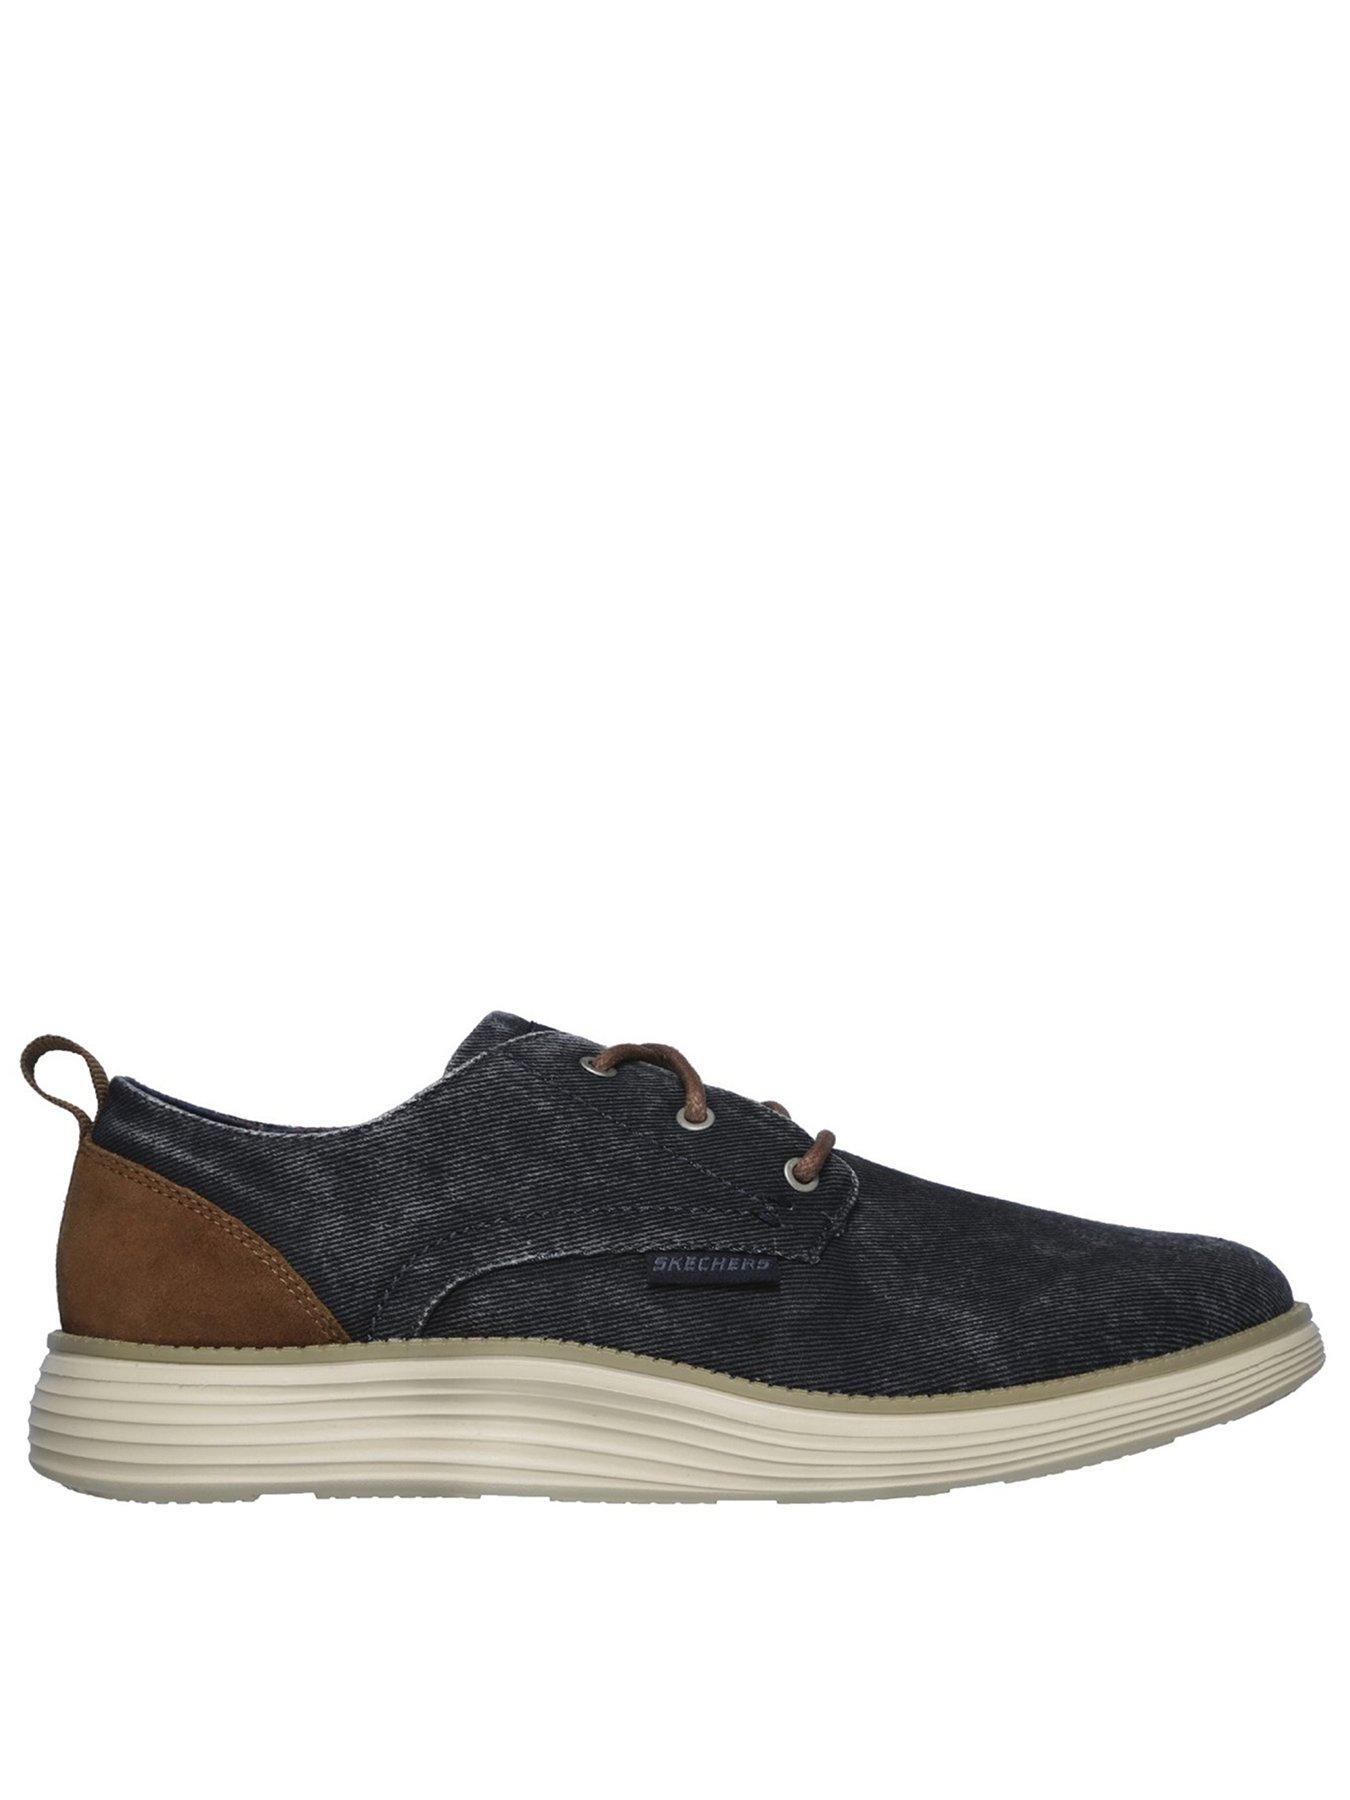 Skechers Status 2.0 Lace Up Shoes - Navy | very.co.uk